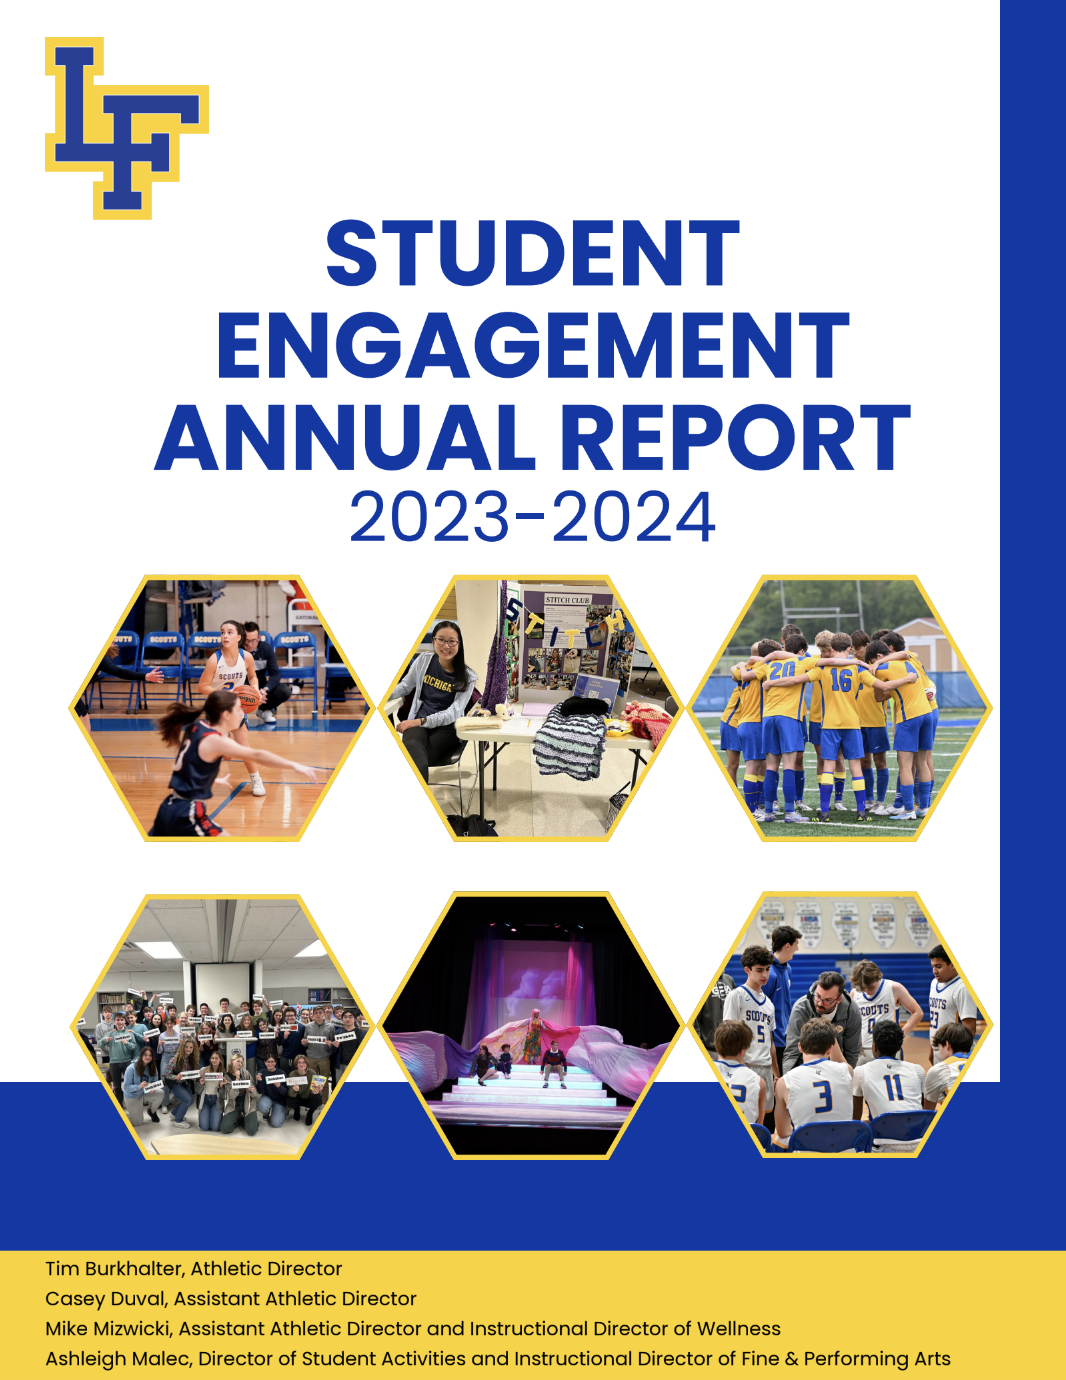 Student Annual Engagement Report 2023-2024